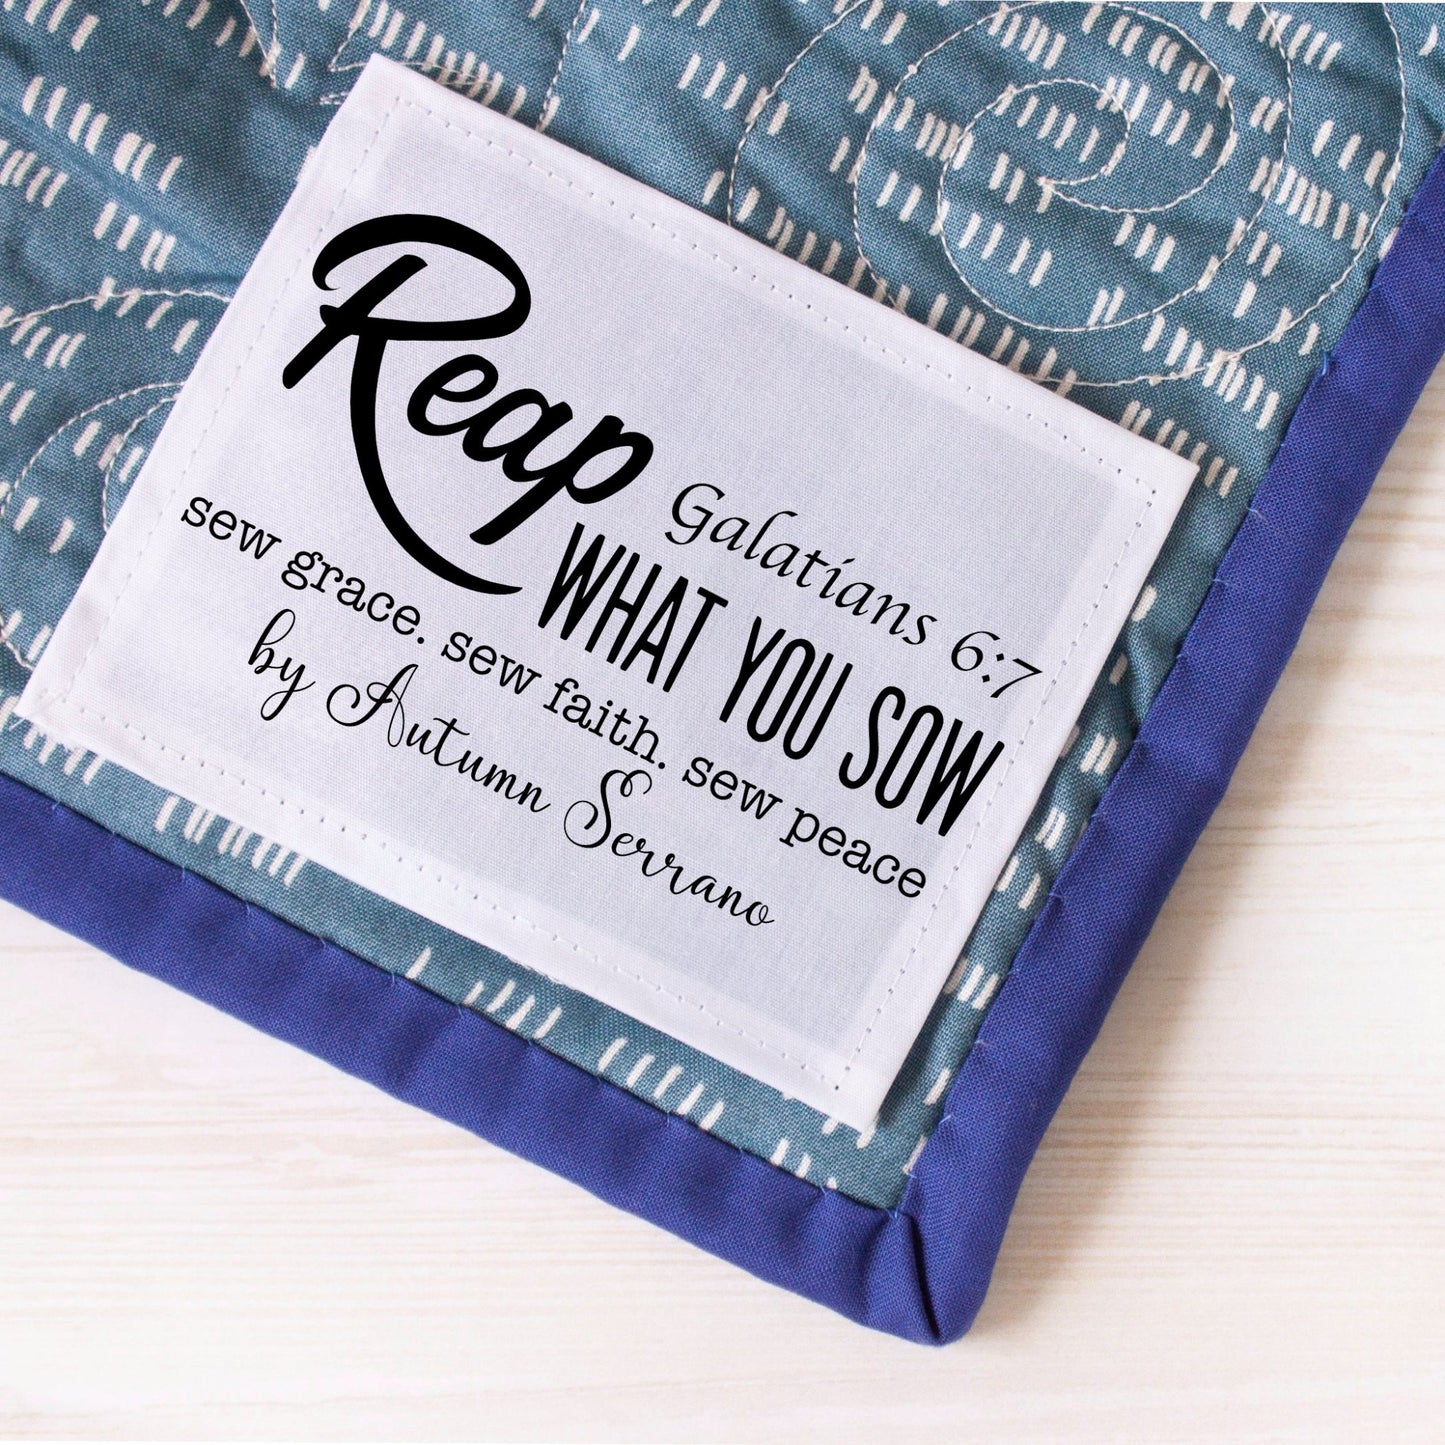 Reap What You Sew. Sew Grace. Sew Faith. Sew Peace. Galatians 6:7 Inspirational quilt labels - Jammin Threads